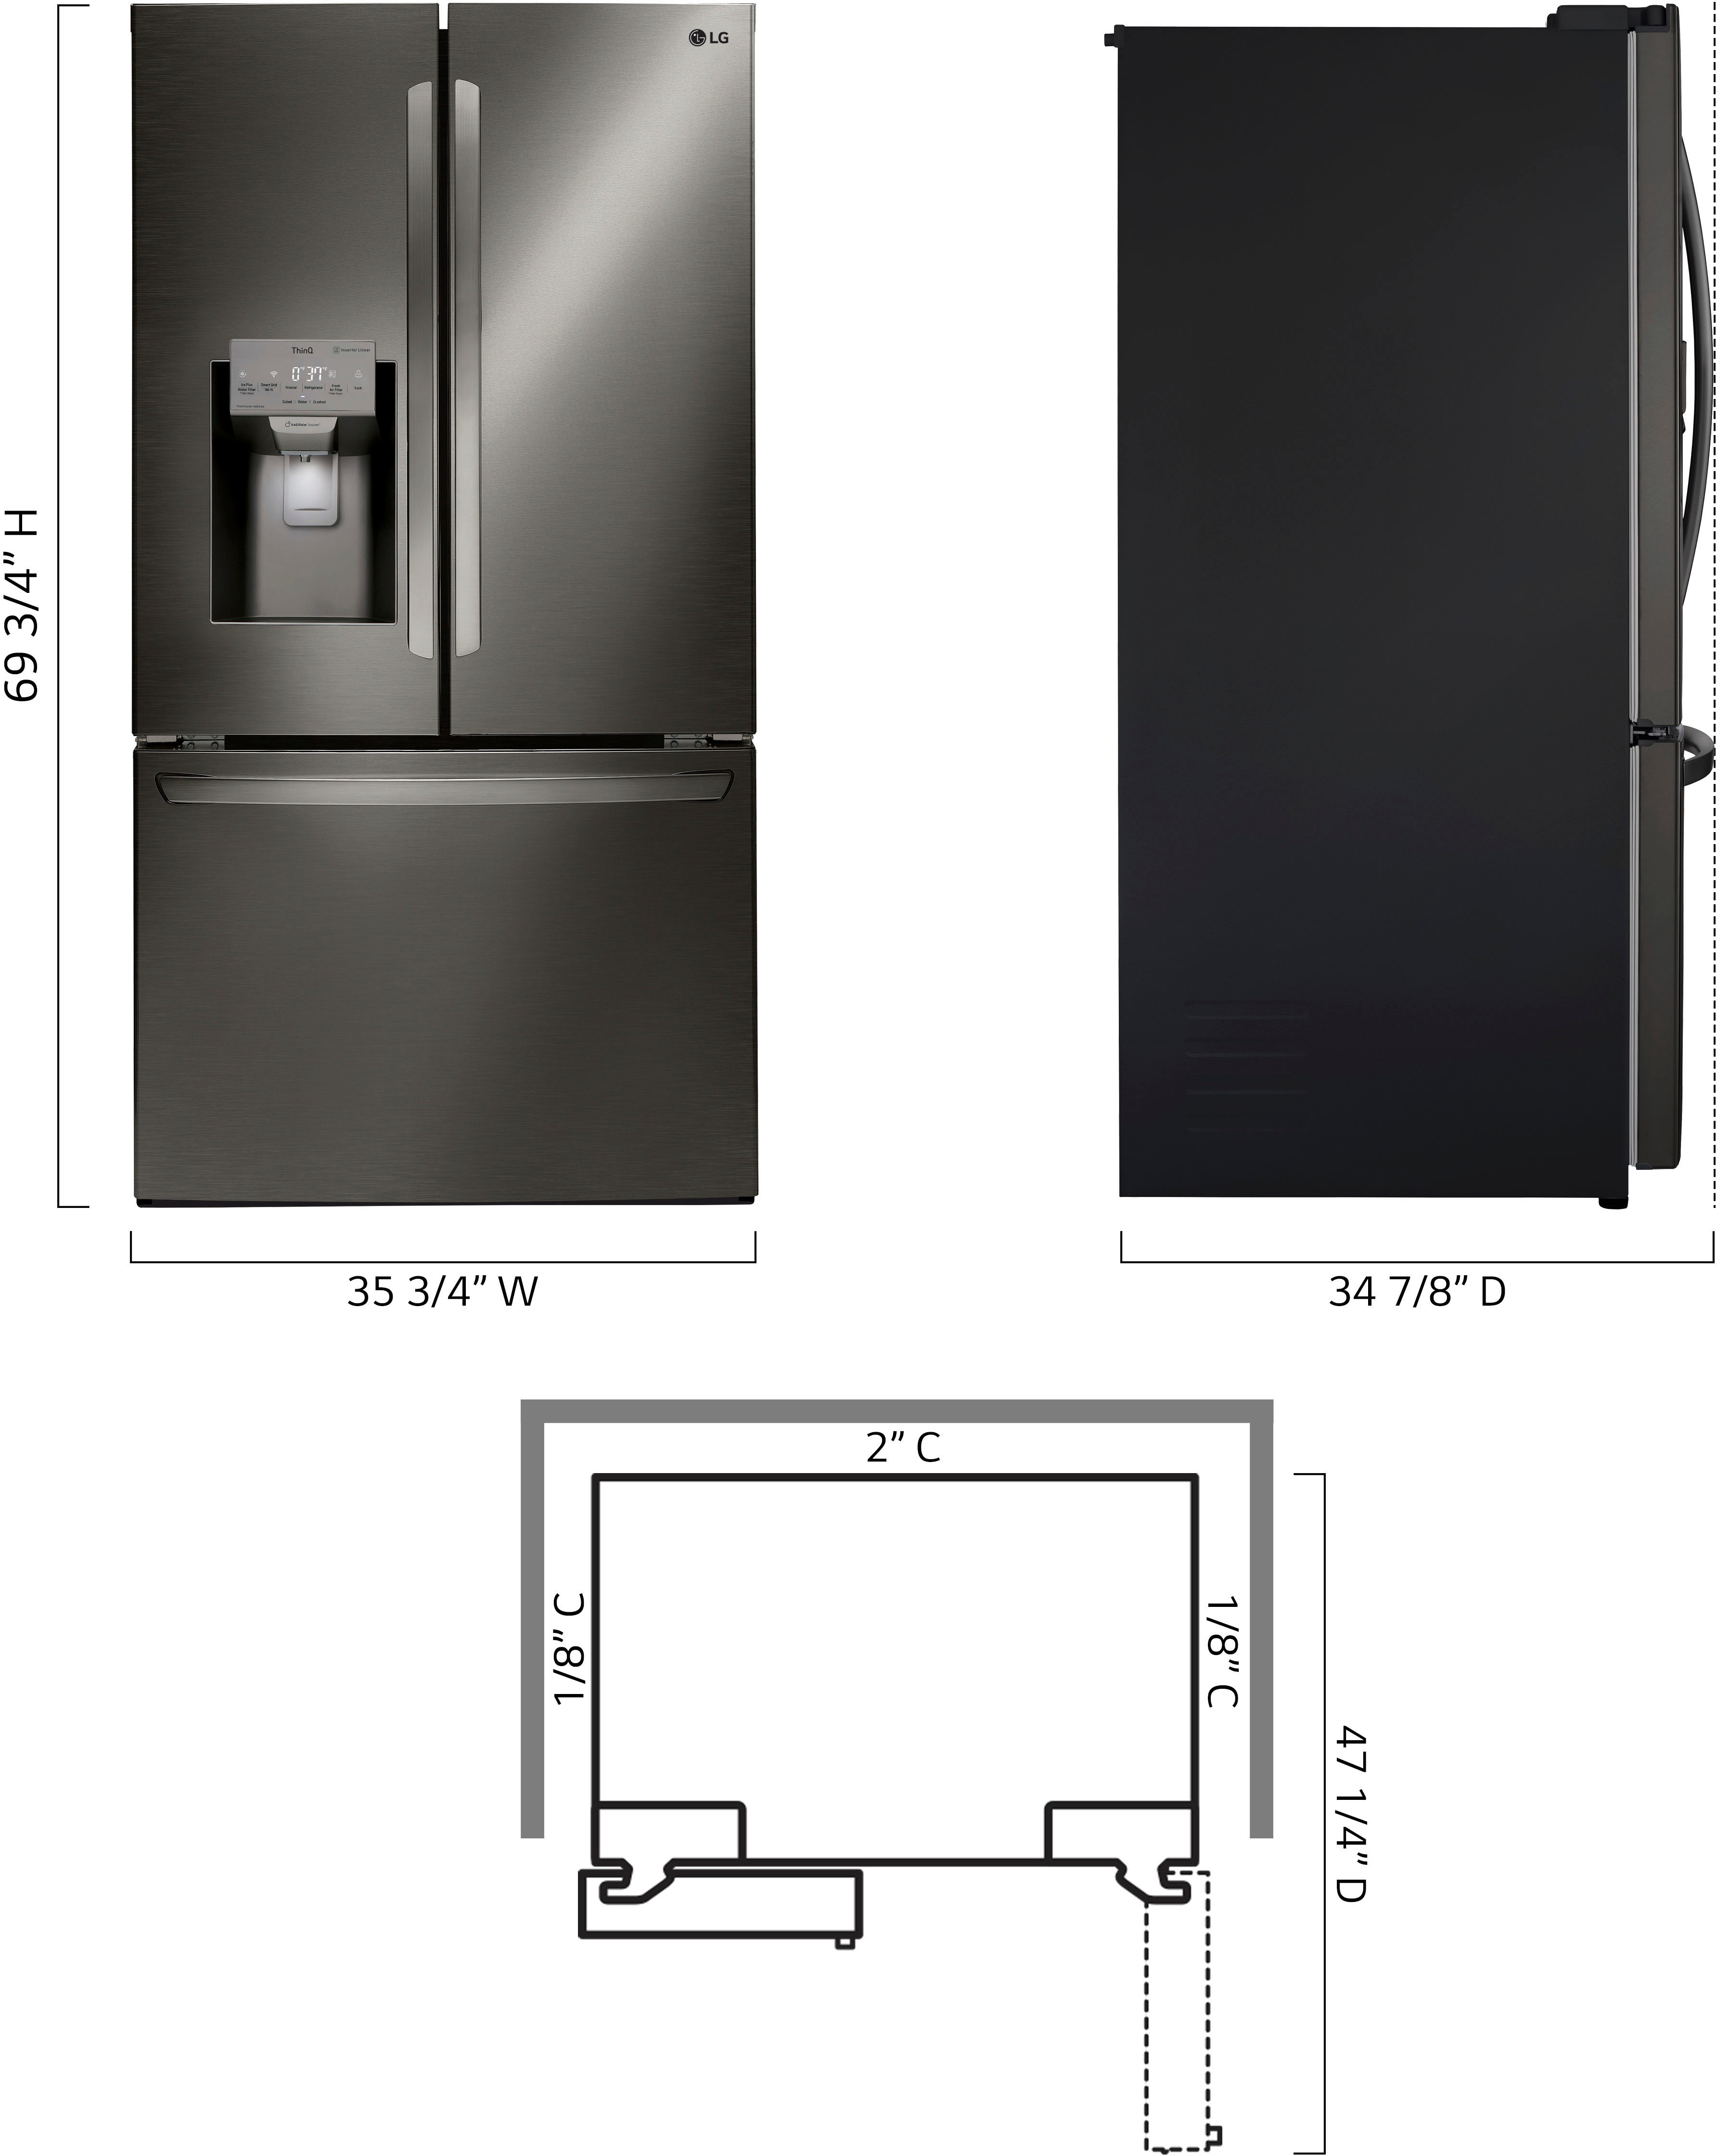 Left View: LG - 26.2 Cu. Ft. French Door Smart Refrigerator with Dual Ice Maker - Black Stainless Steel